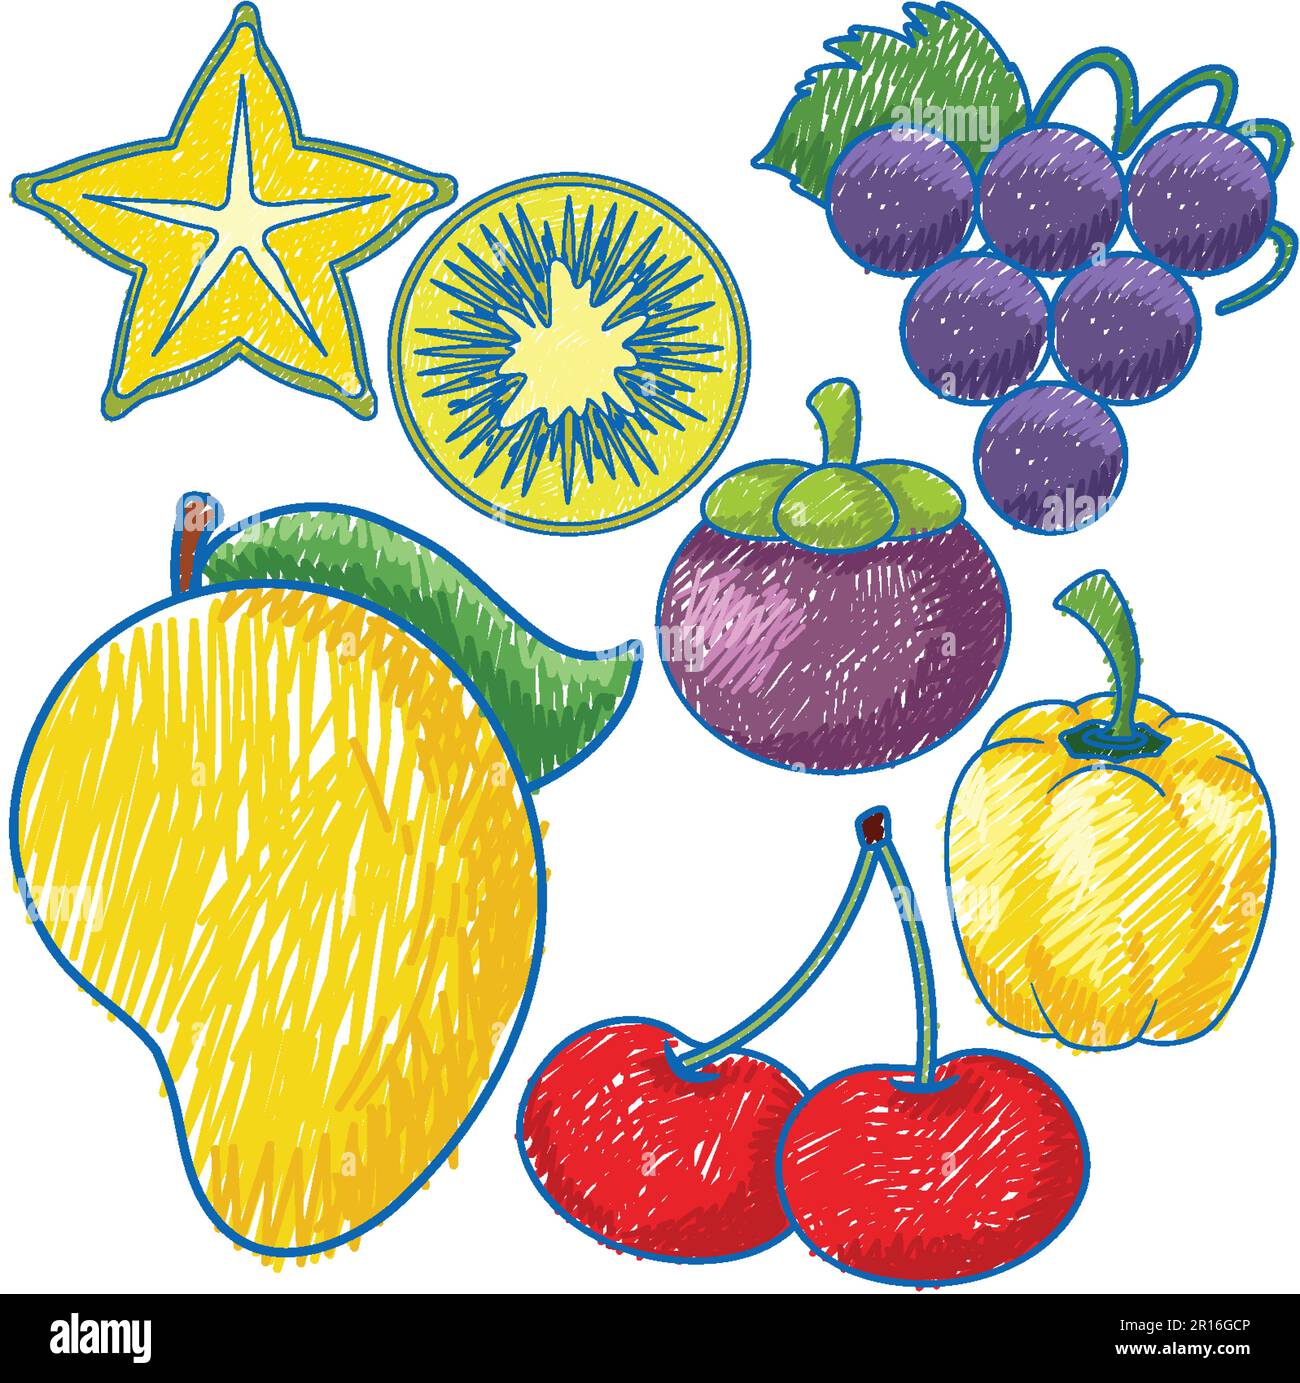 Veggies coloring page | Free Printable Coloring Pages